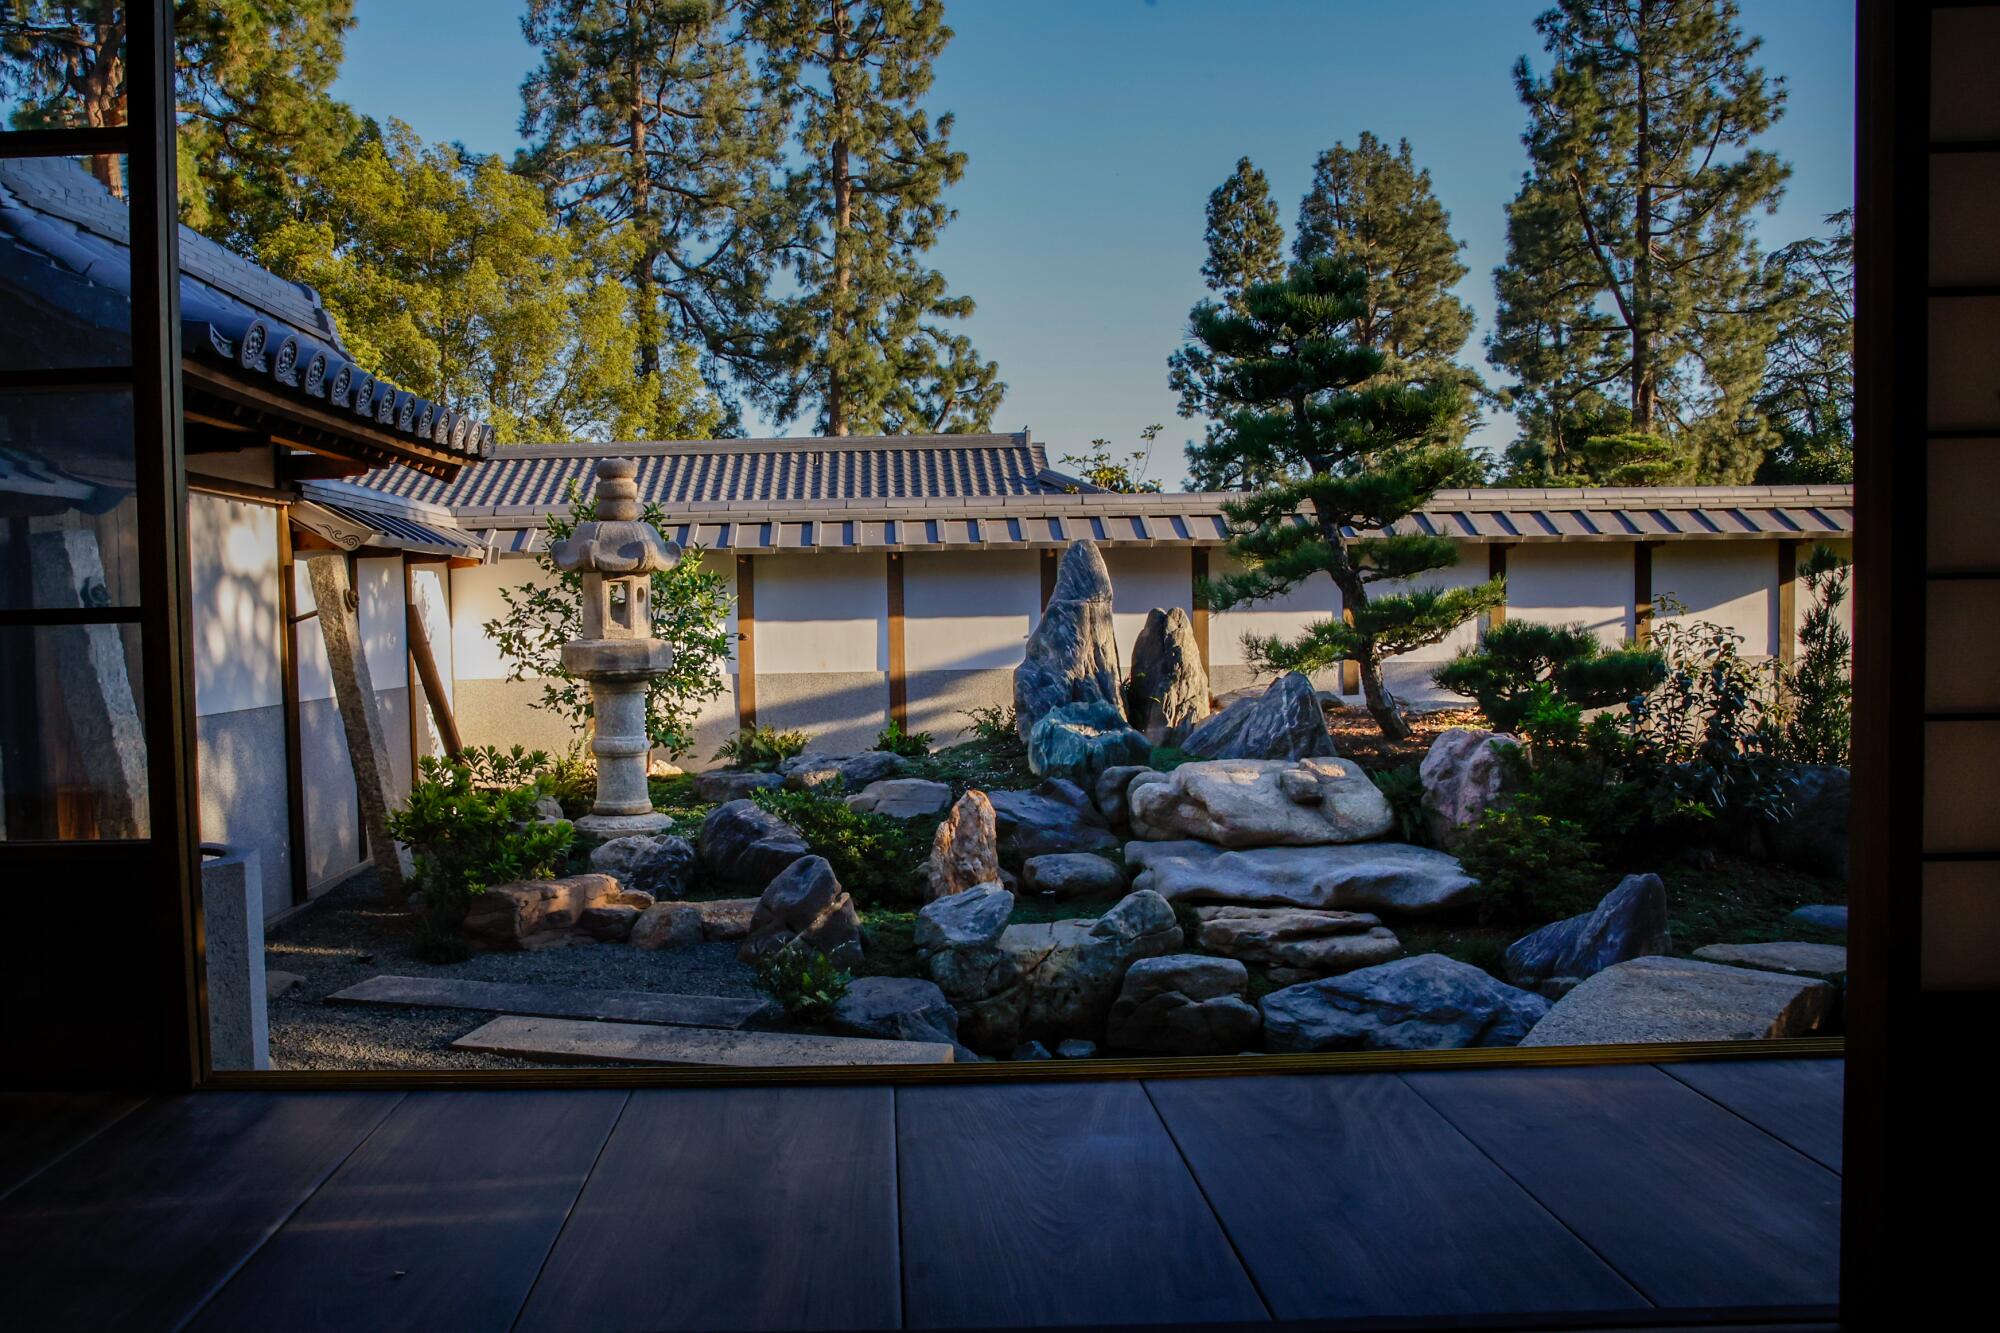 The exquisite Japanese garden of distinctive stones, pond, trees and shrubs outside the shōya's grand room for dignitaries.